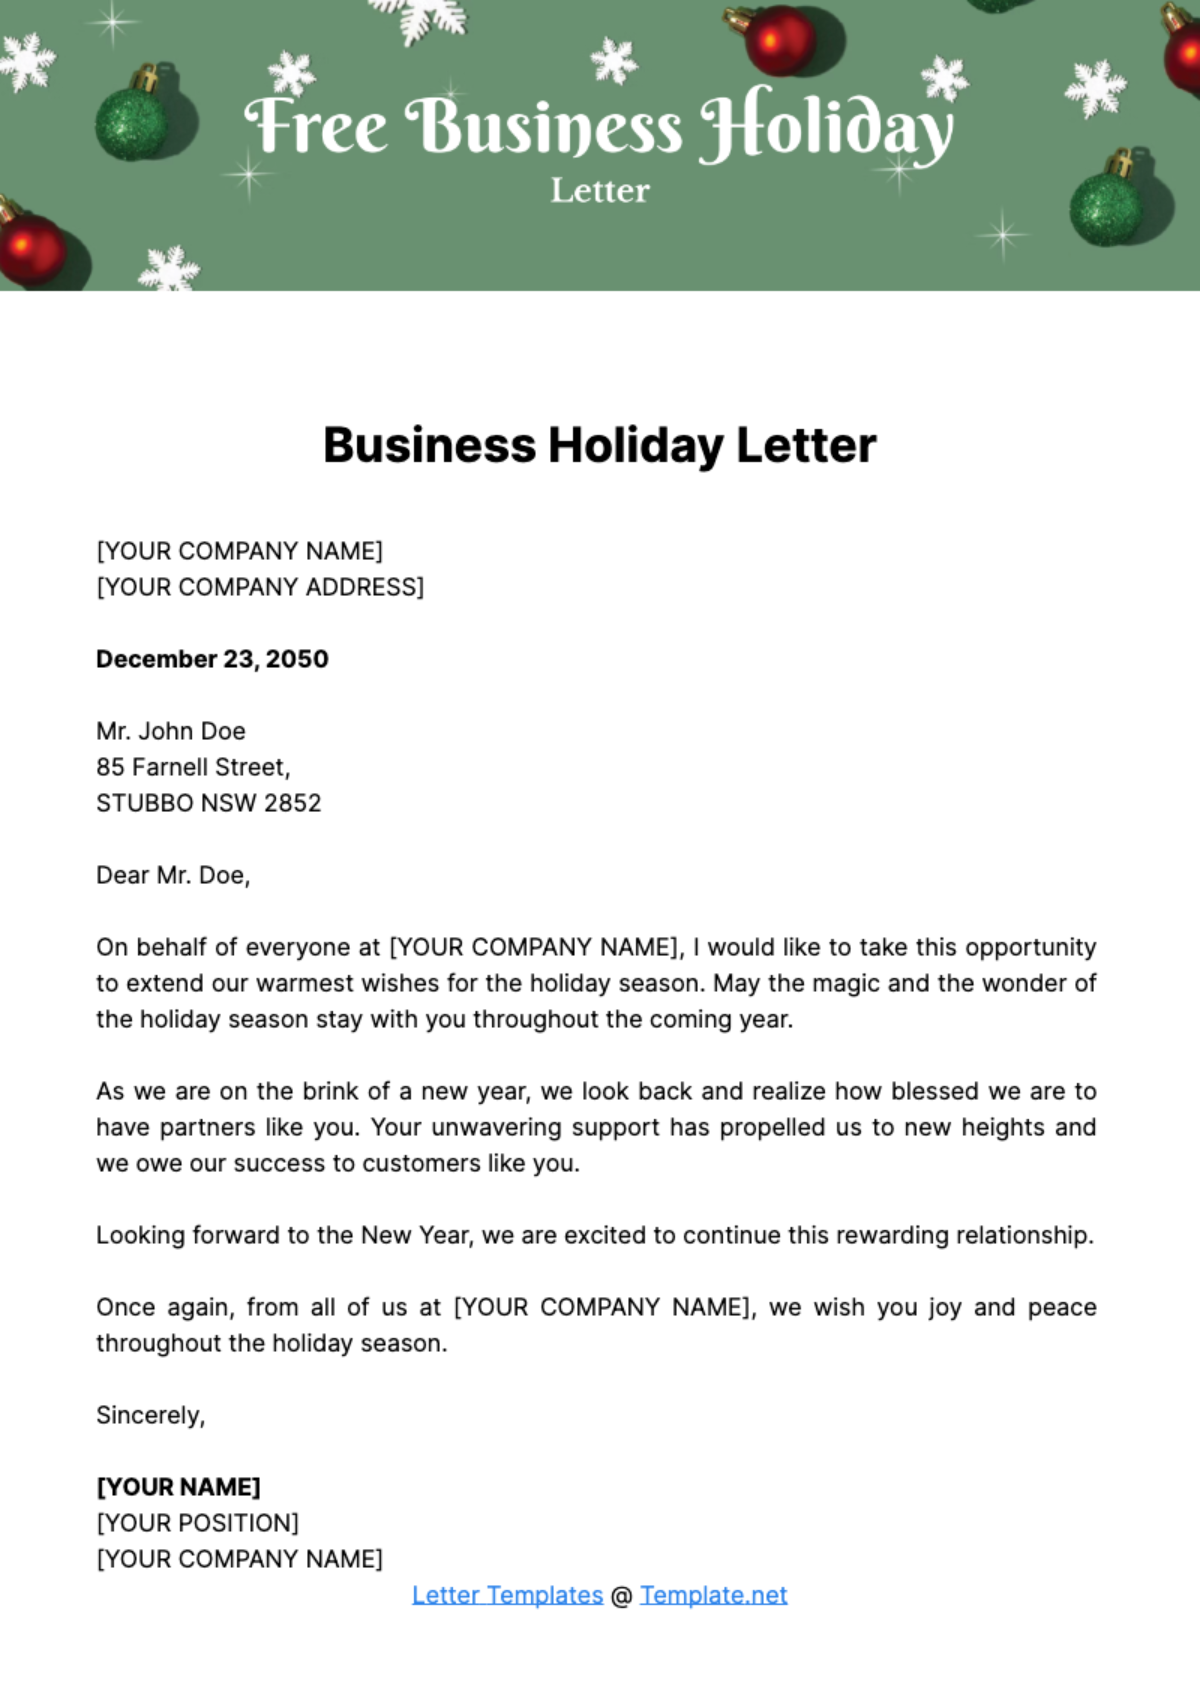 Free Business Holiday Letter Template